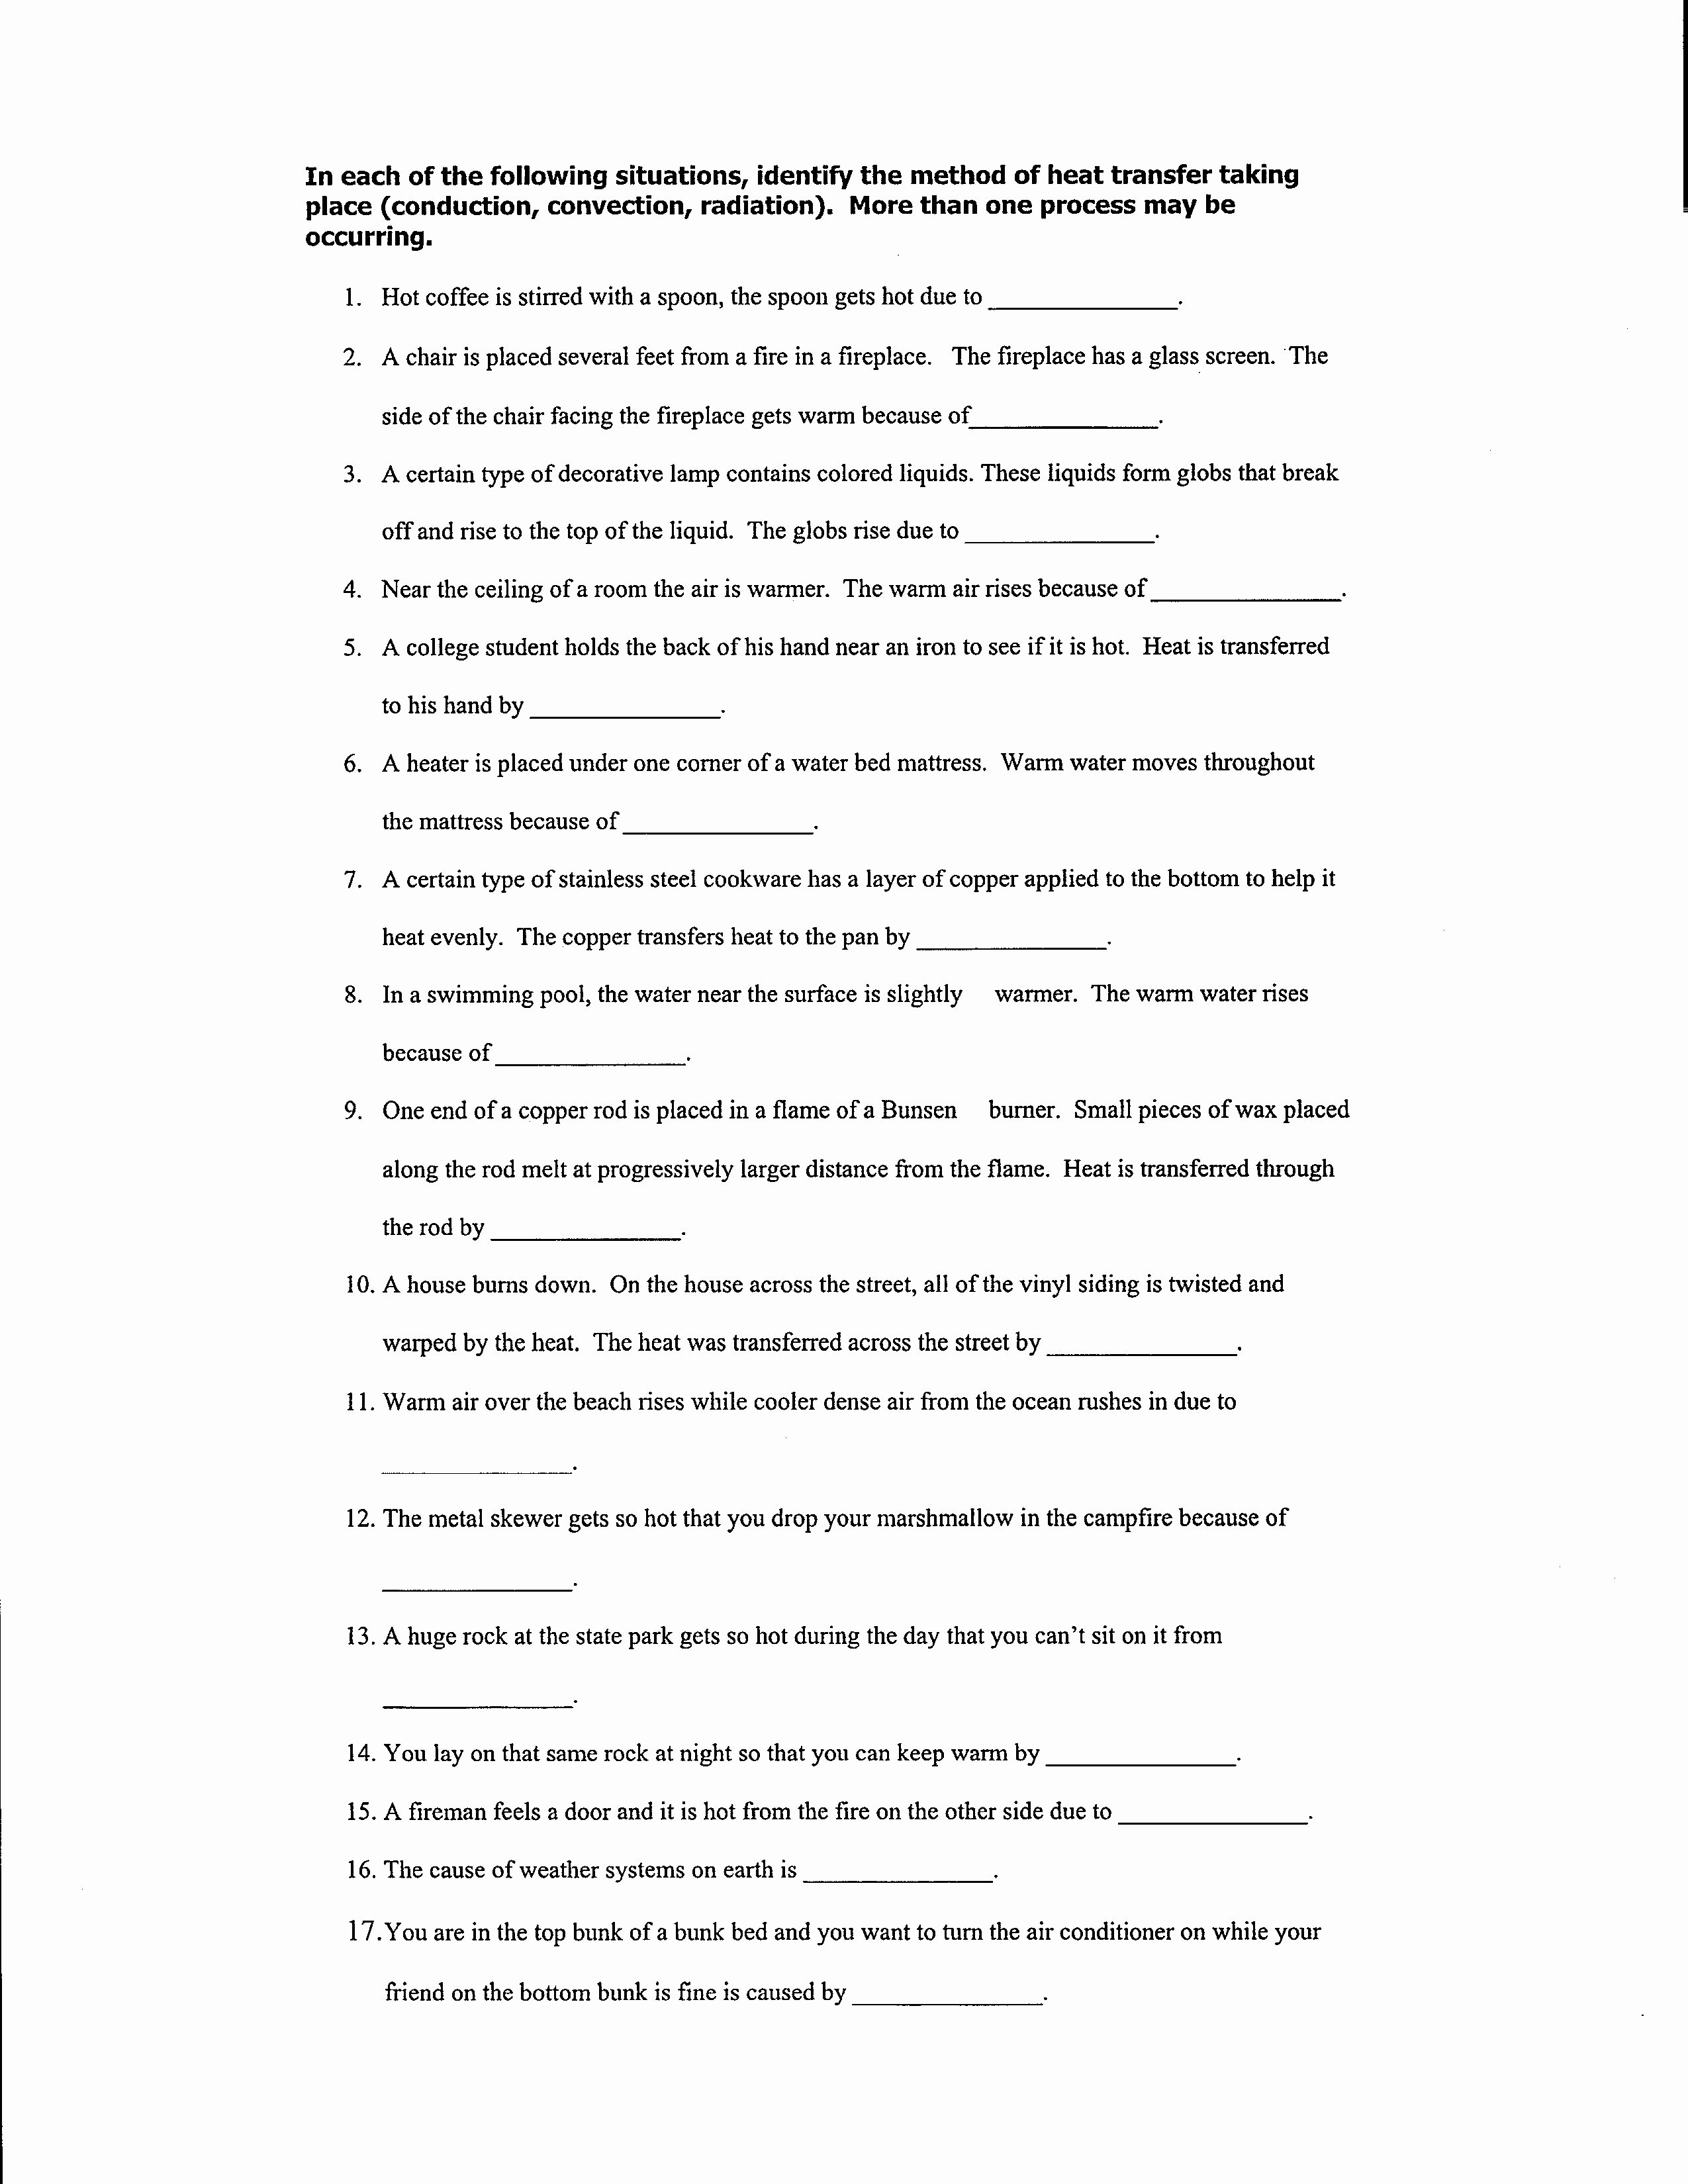 Conduction Convection Radiation Worksheet New assignments Mr foreman S 7th and 8th Grade Classes